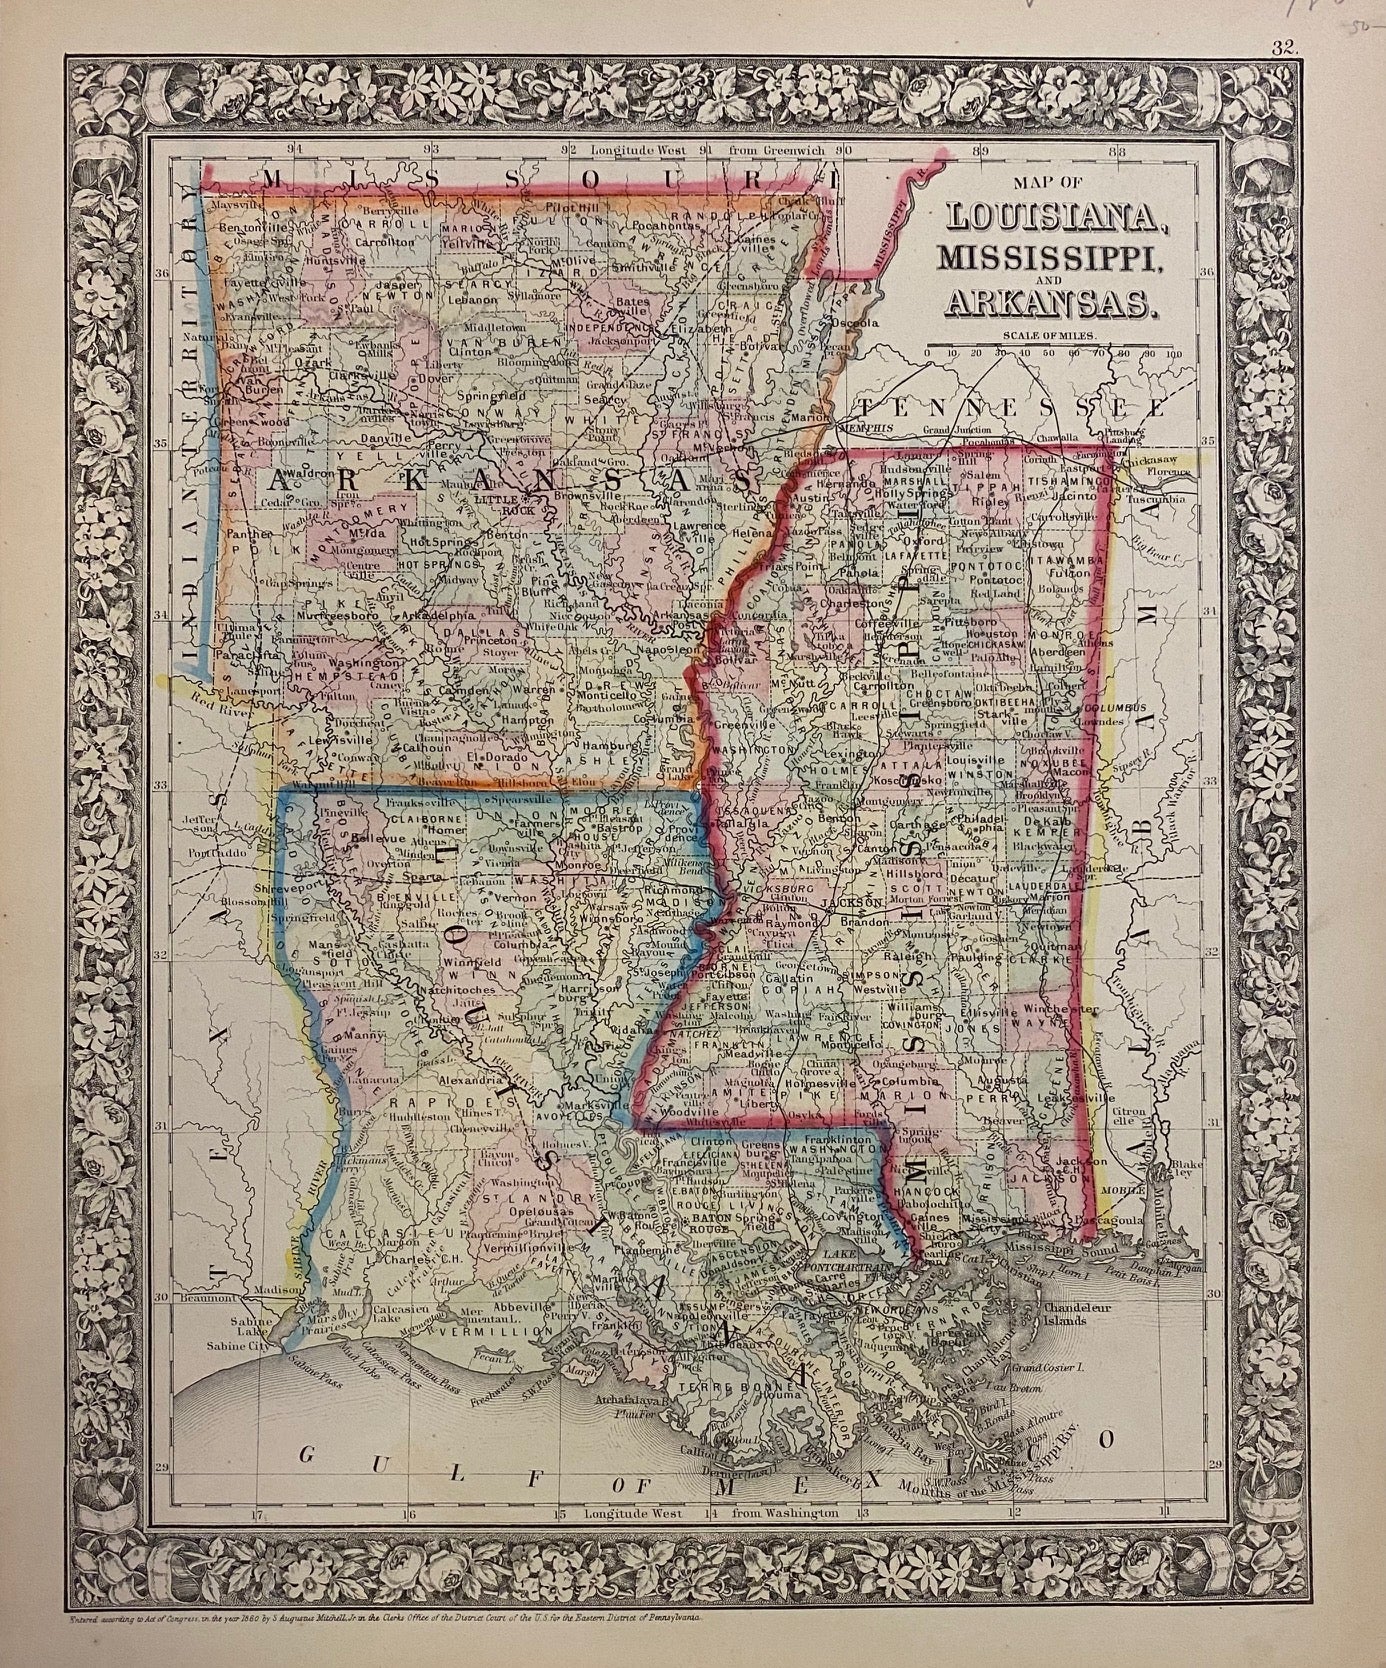 Map of Louisiana and Mississippi